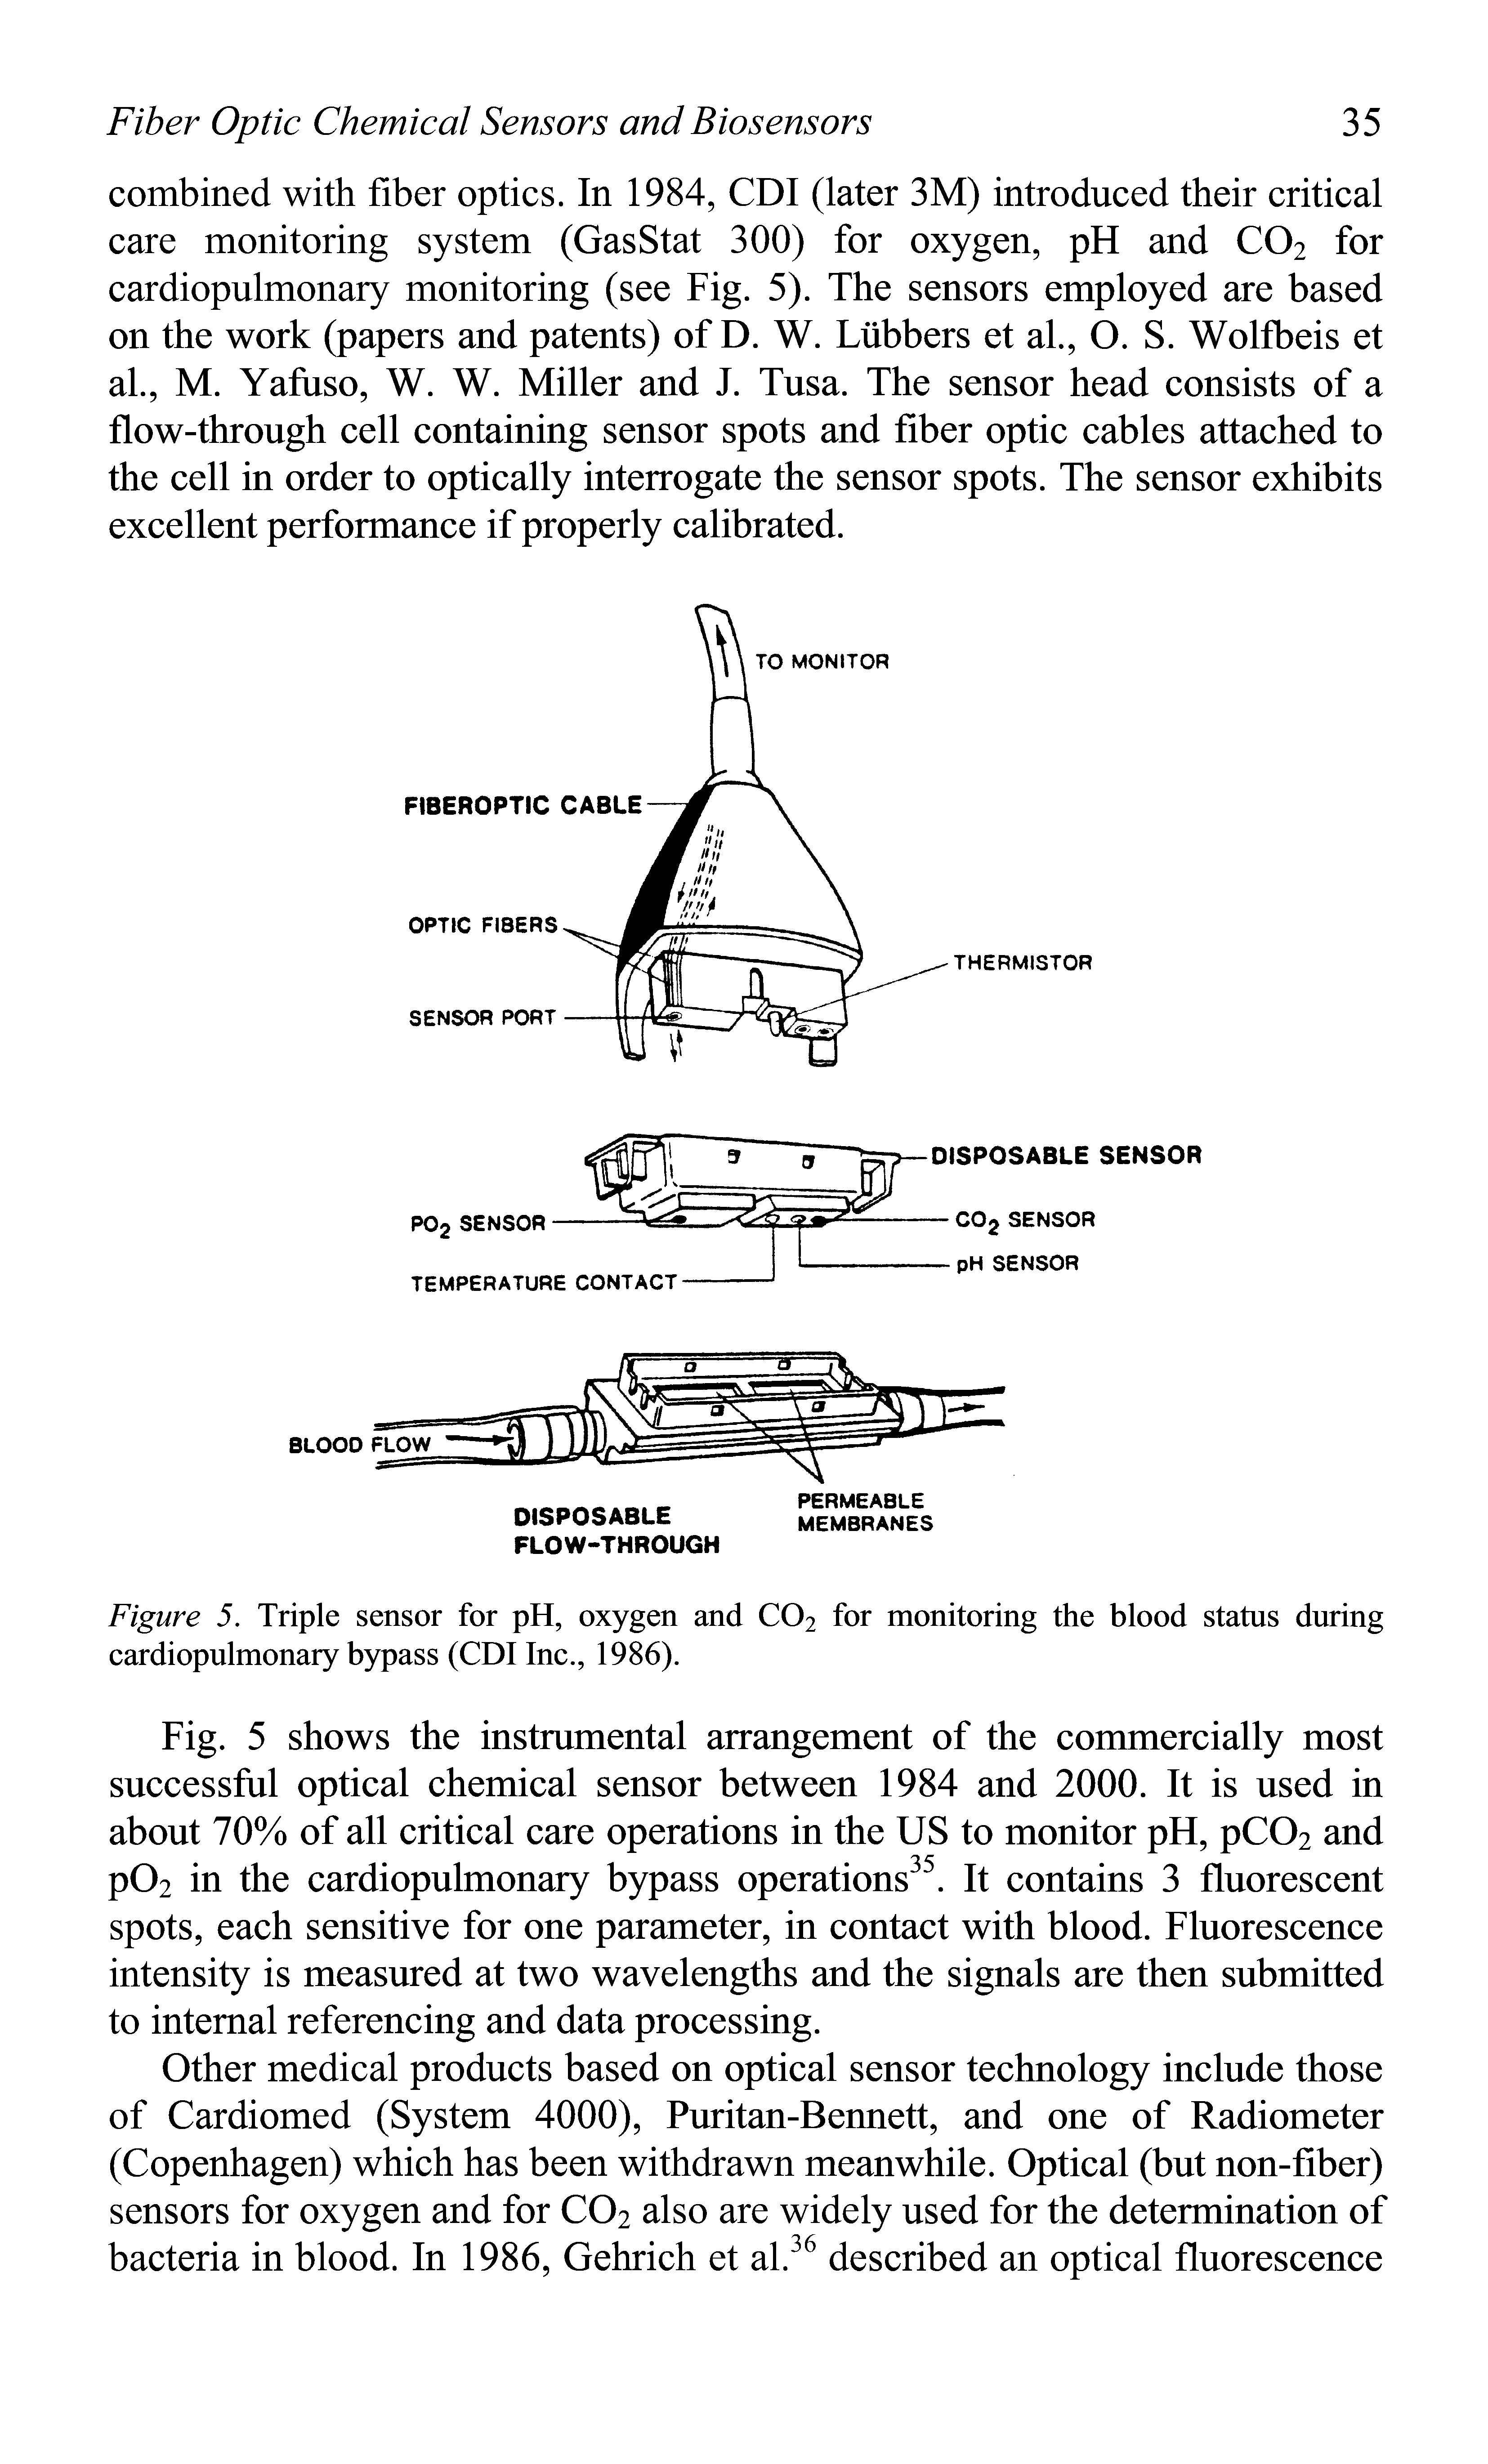 Figure 5. Triple sensor for pH, oxygen and C02 for monitoring the blood status during cardiopulmonary bypass (CDI Inc., 1986).